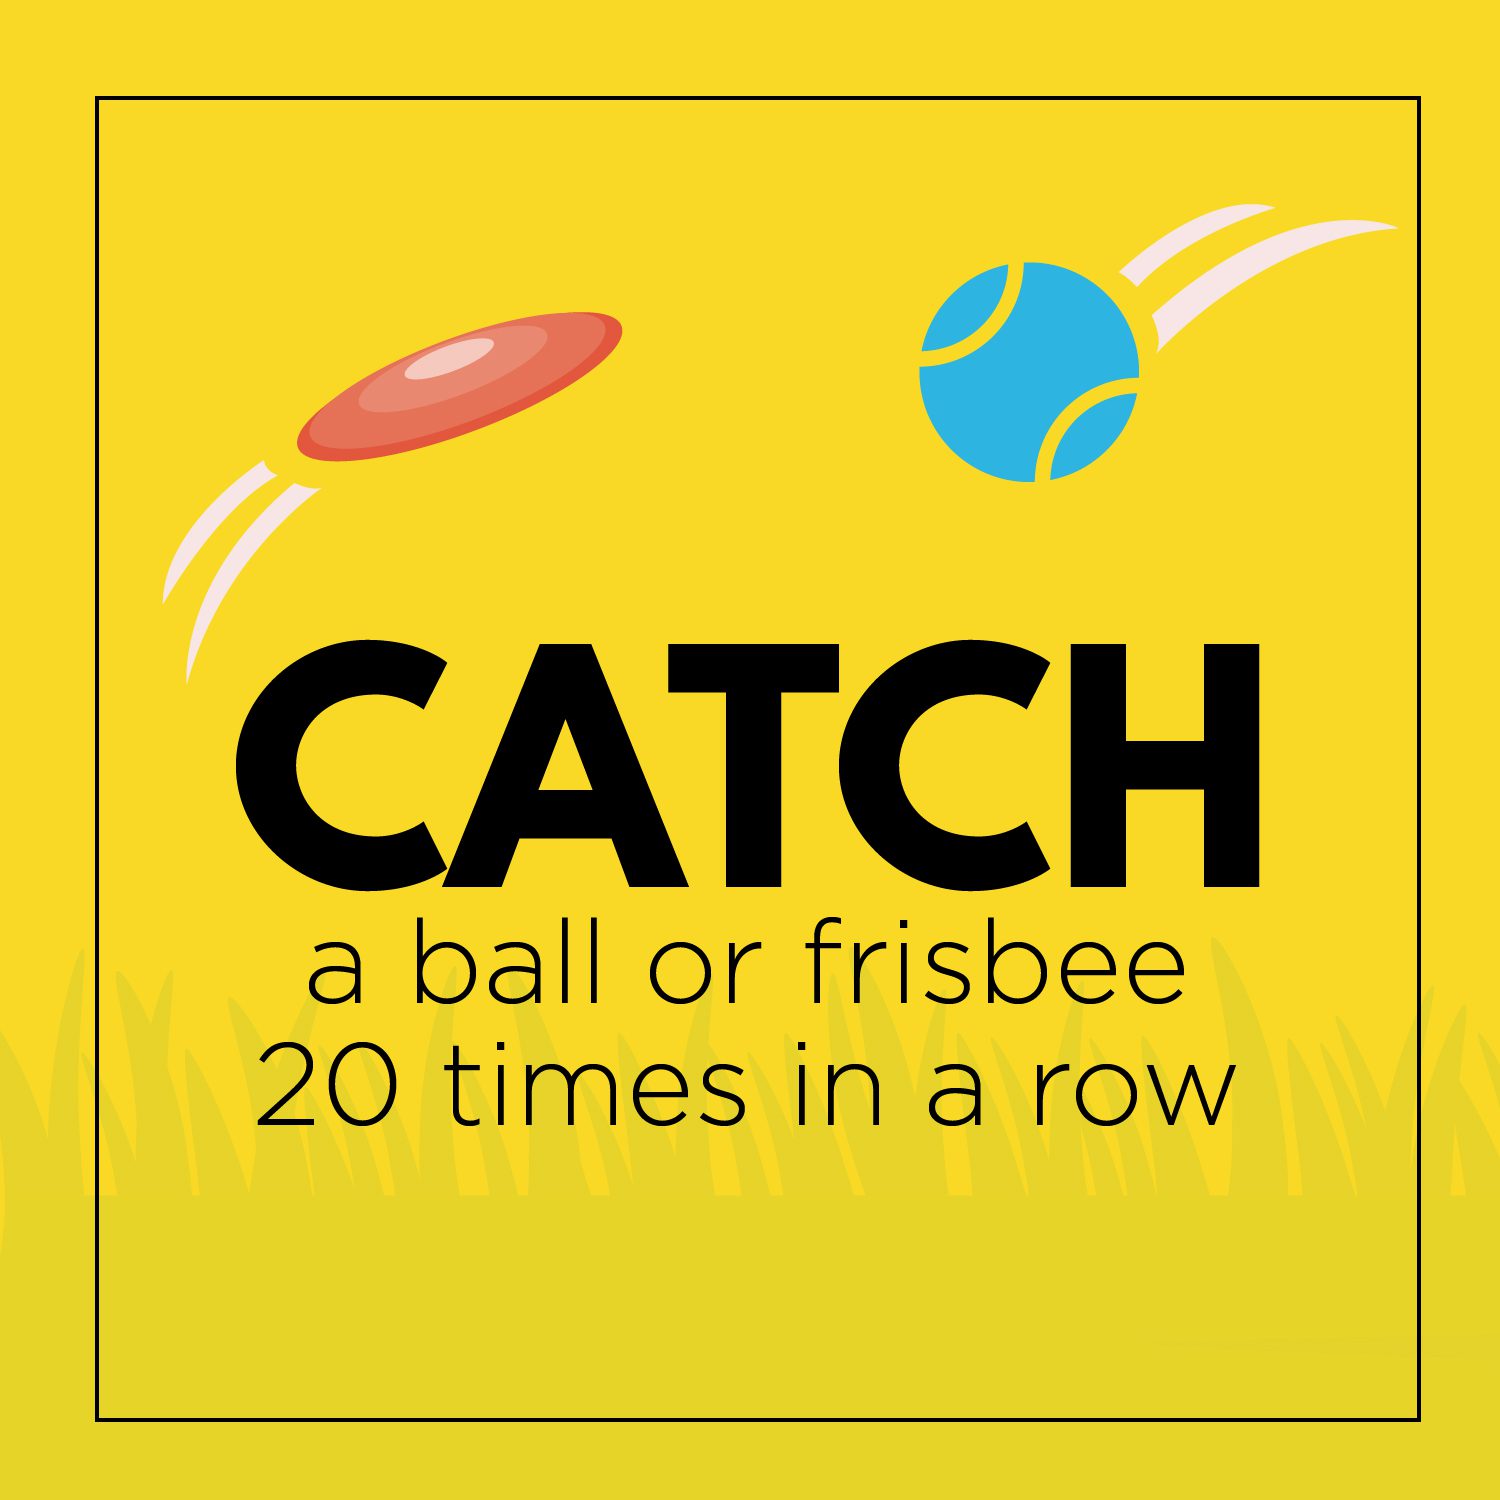 Catch a ball or frisbee 20 times in a row